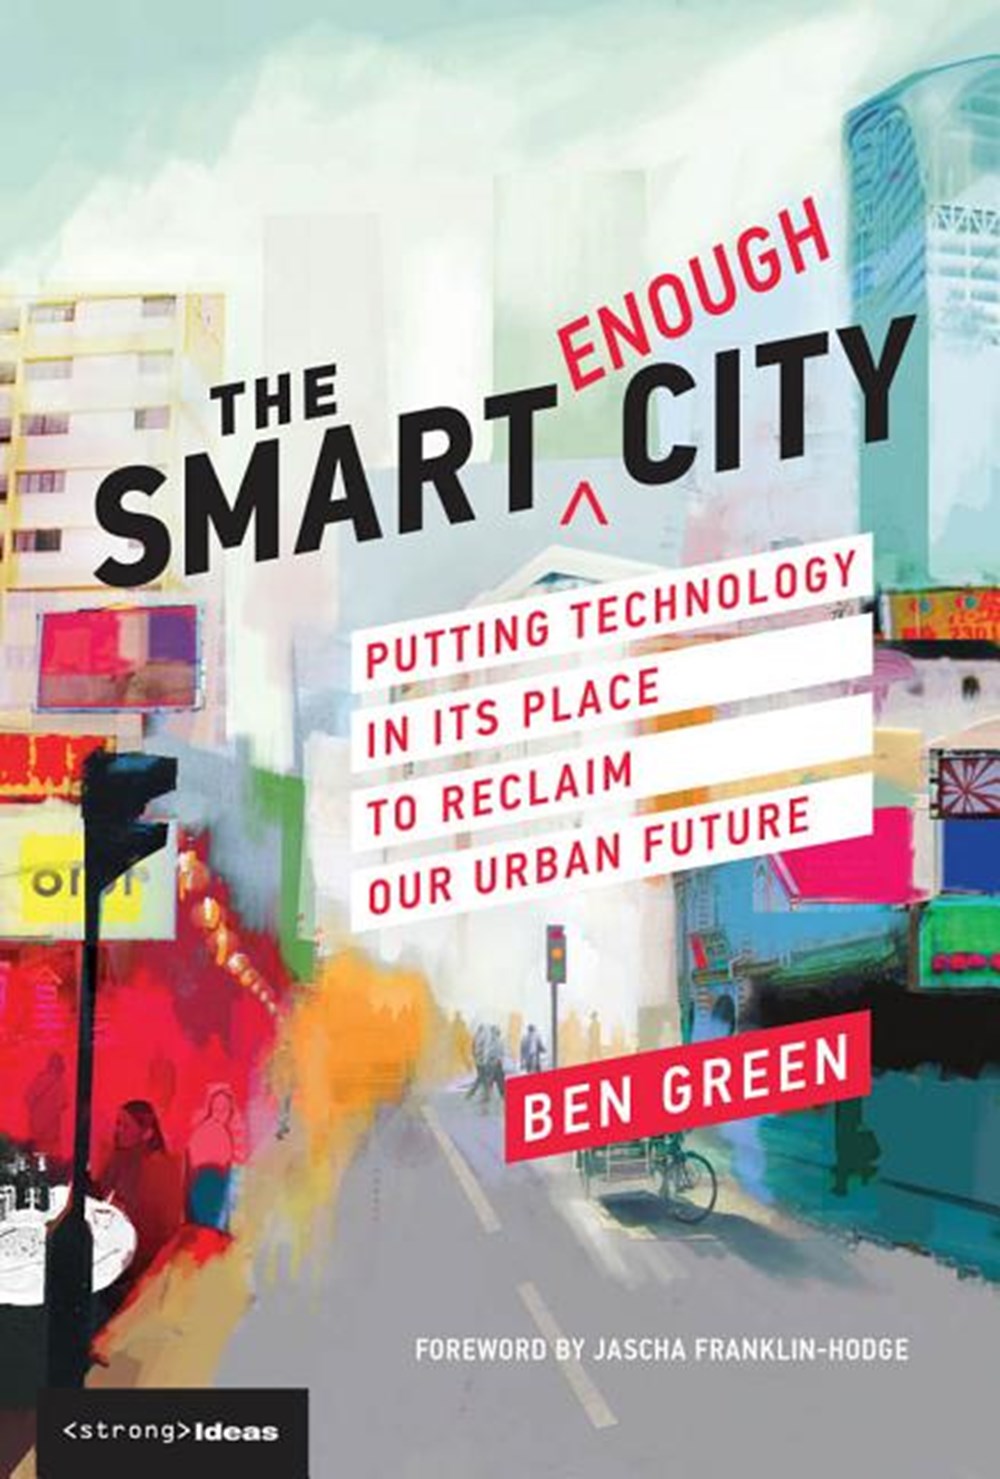 Smart Enough City: Putting Technology in Its Place to Reclaim Our Urban Future